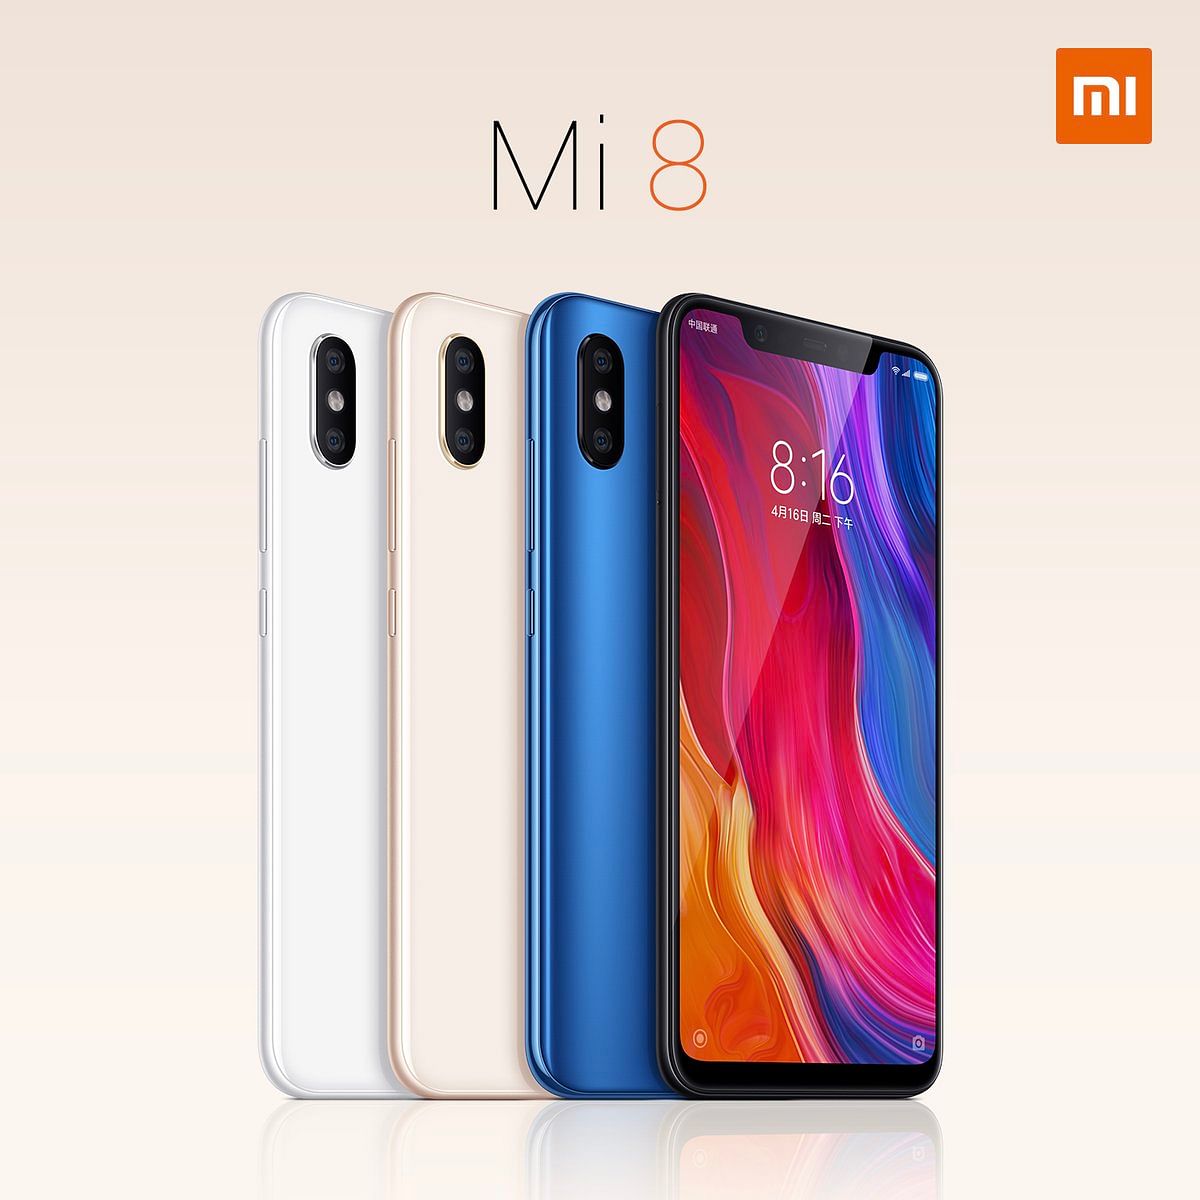 Xiaomi Mi 8, Mi 8 Explorer Edition, Mi 8 SE launched in China. Will they come to India soon? We are hopeful.